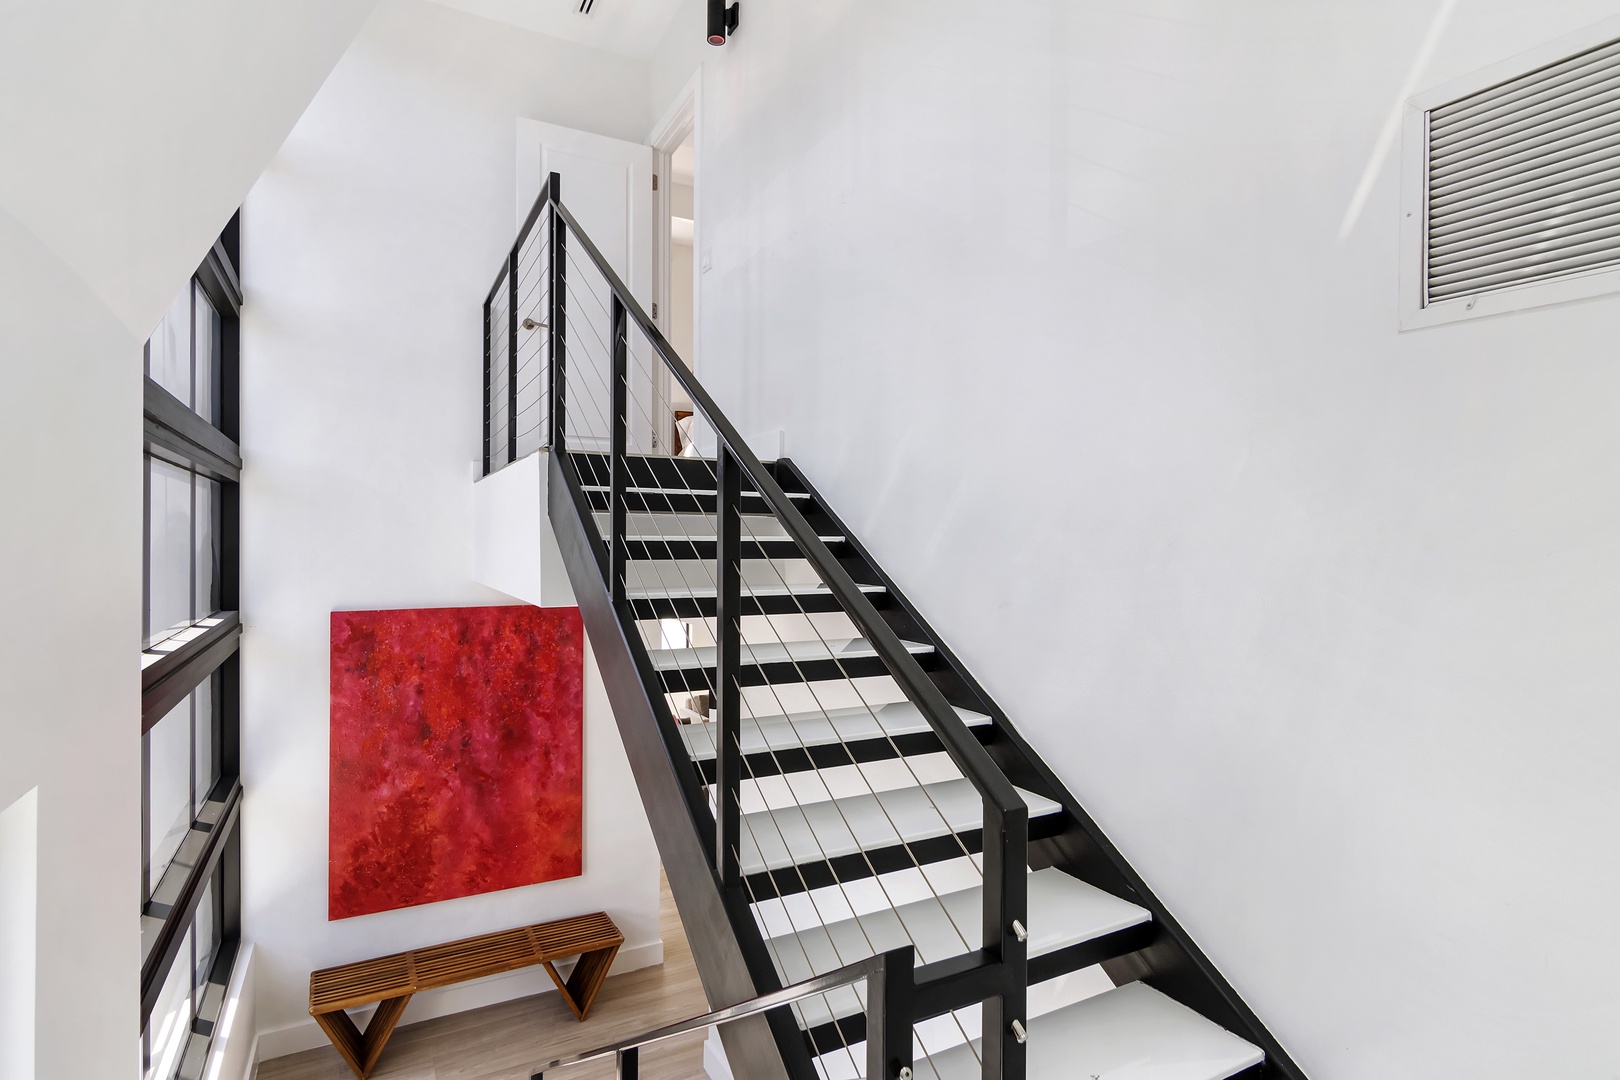 Natural light fills the Instagrammable staircase, leading to the 3rd floor